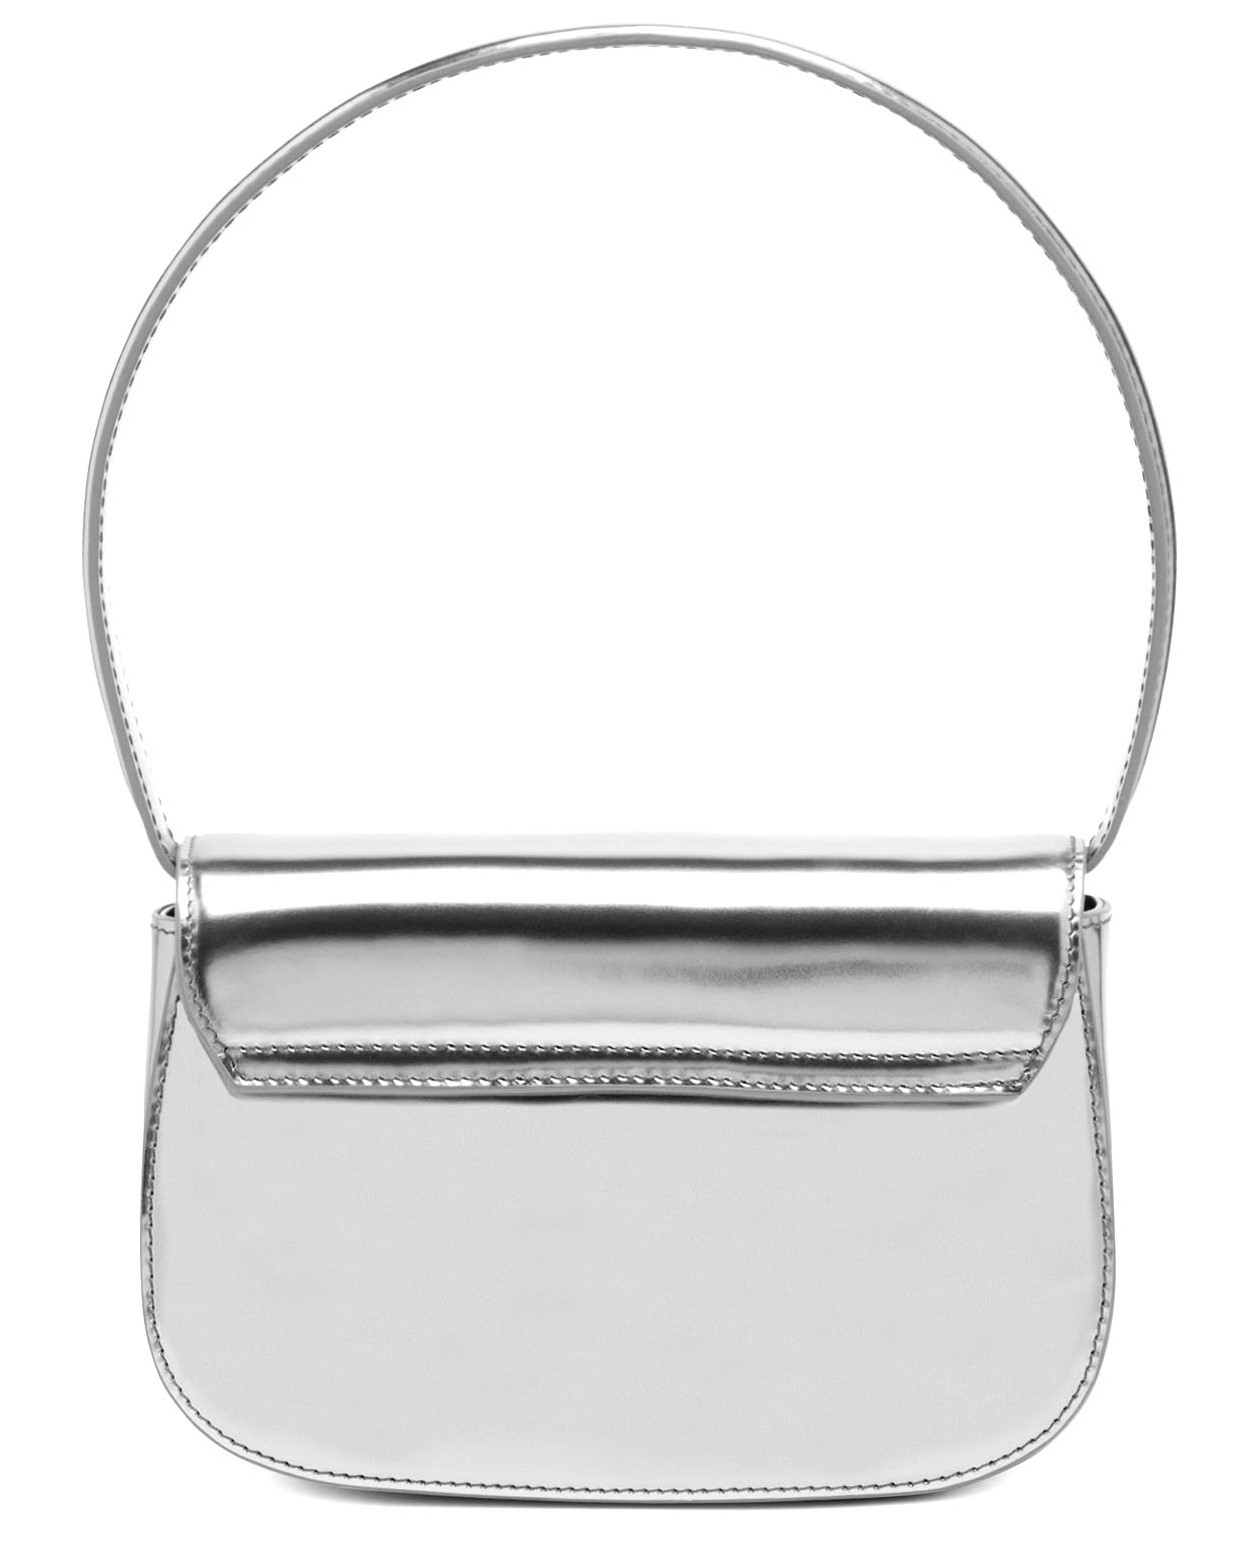 TÚI ĐEO VAI NỮ DIESEL WOMENS 1DR ICONIC SHOULDER BAG IN SILVER MIRRORED LEATHER MÀU BẠC 20